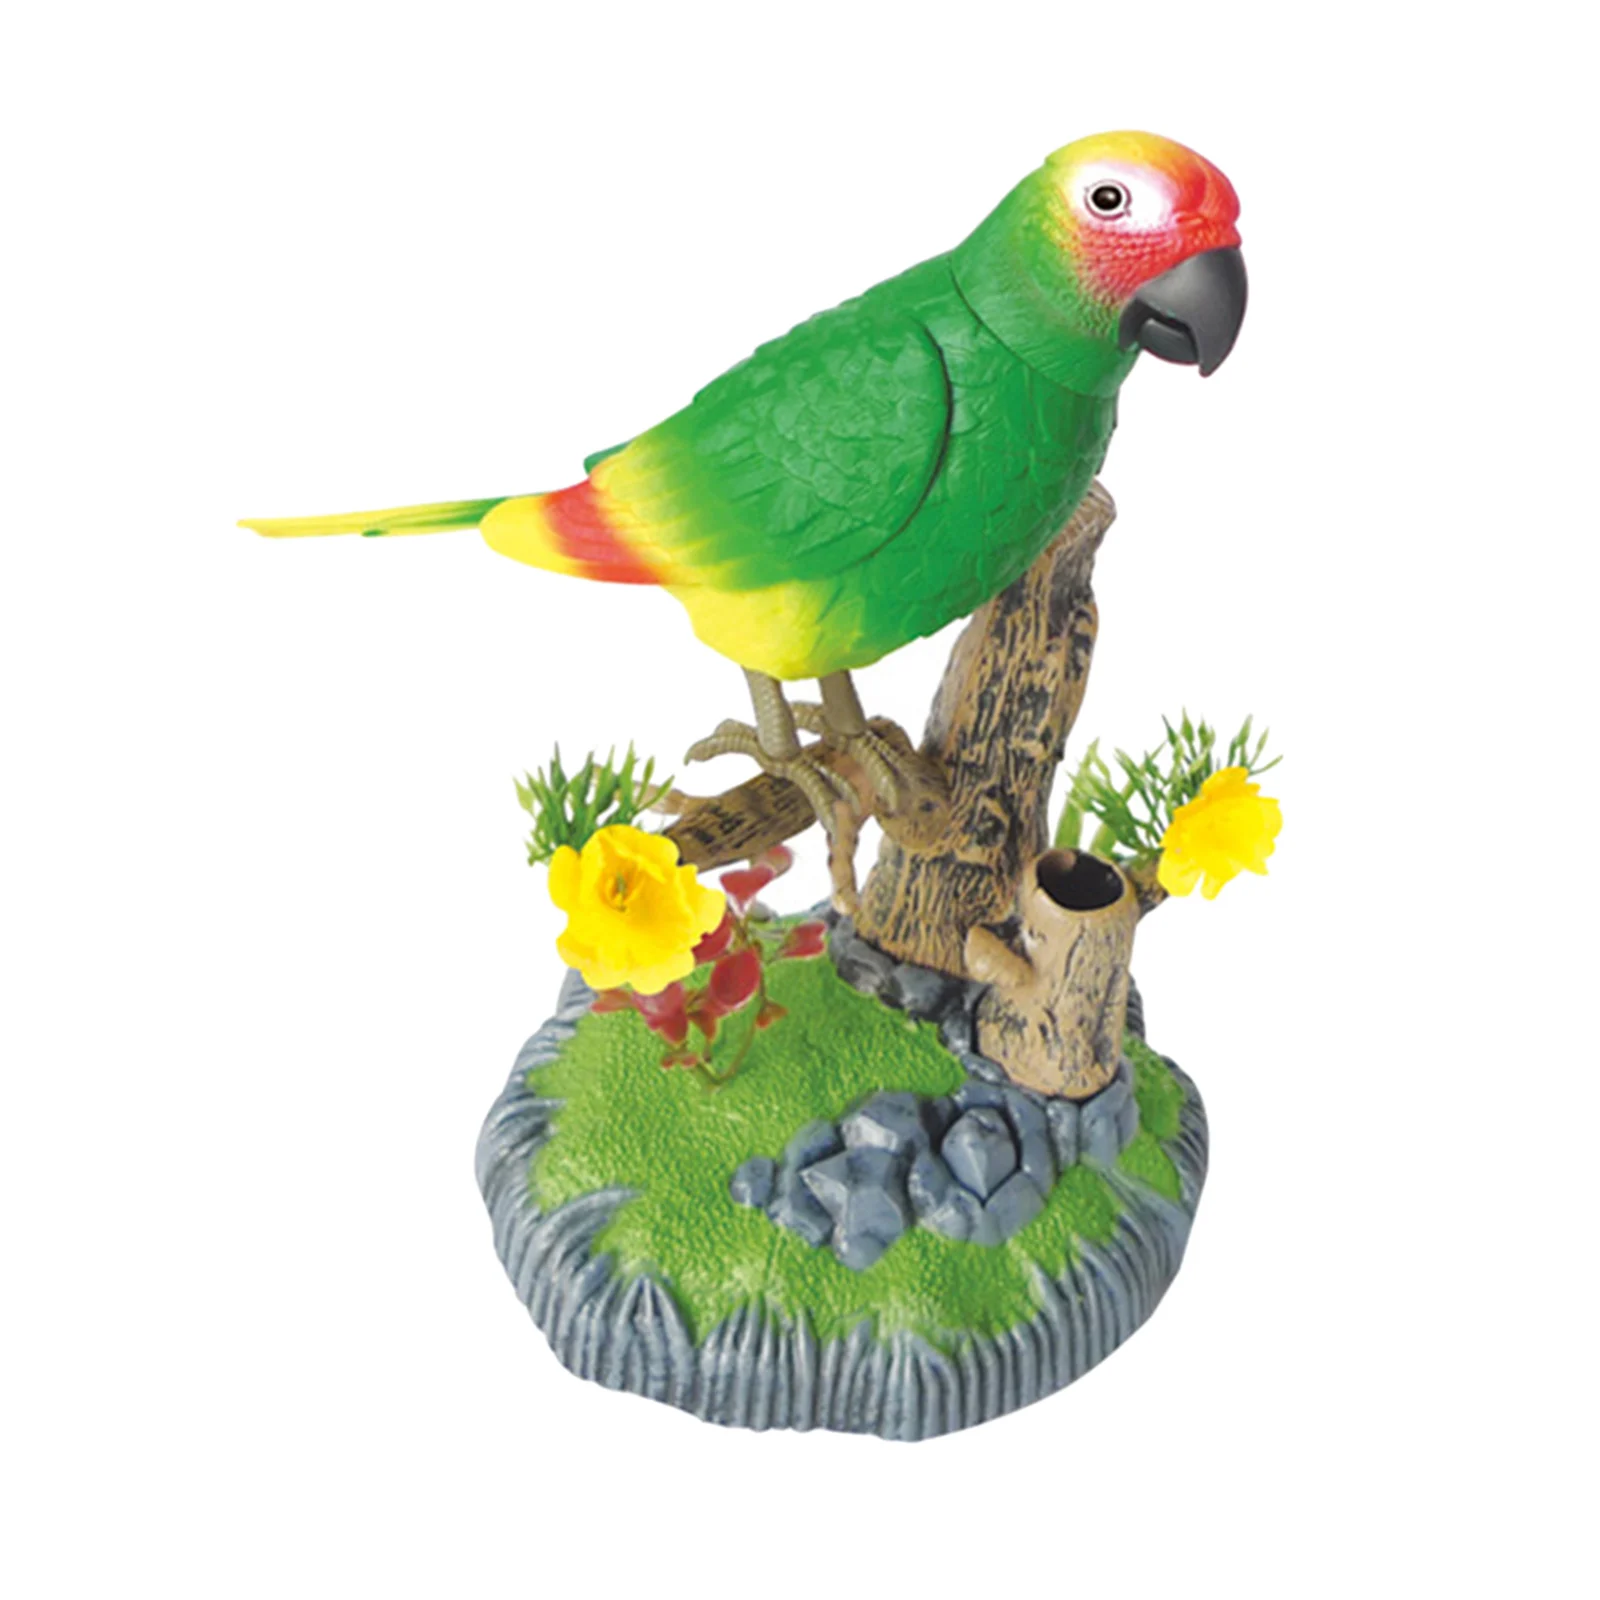 Authentic Electronic Pet Toy Cute Plastic Educational Chirping Bird for Office Decor Garden Decor Home Ornament Children